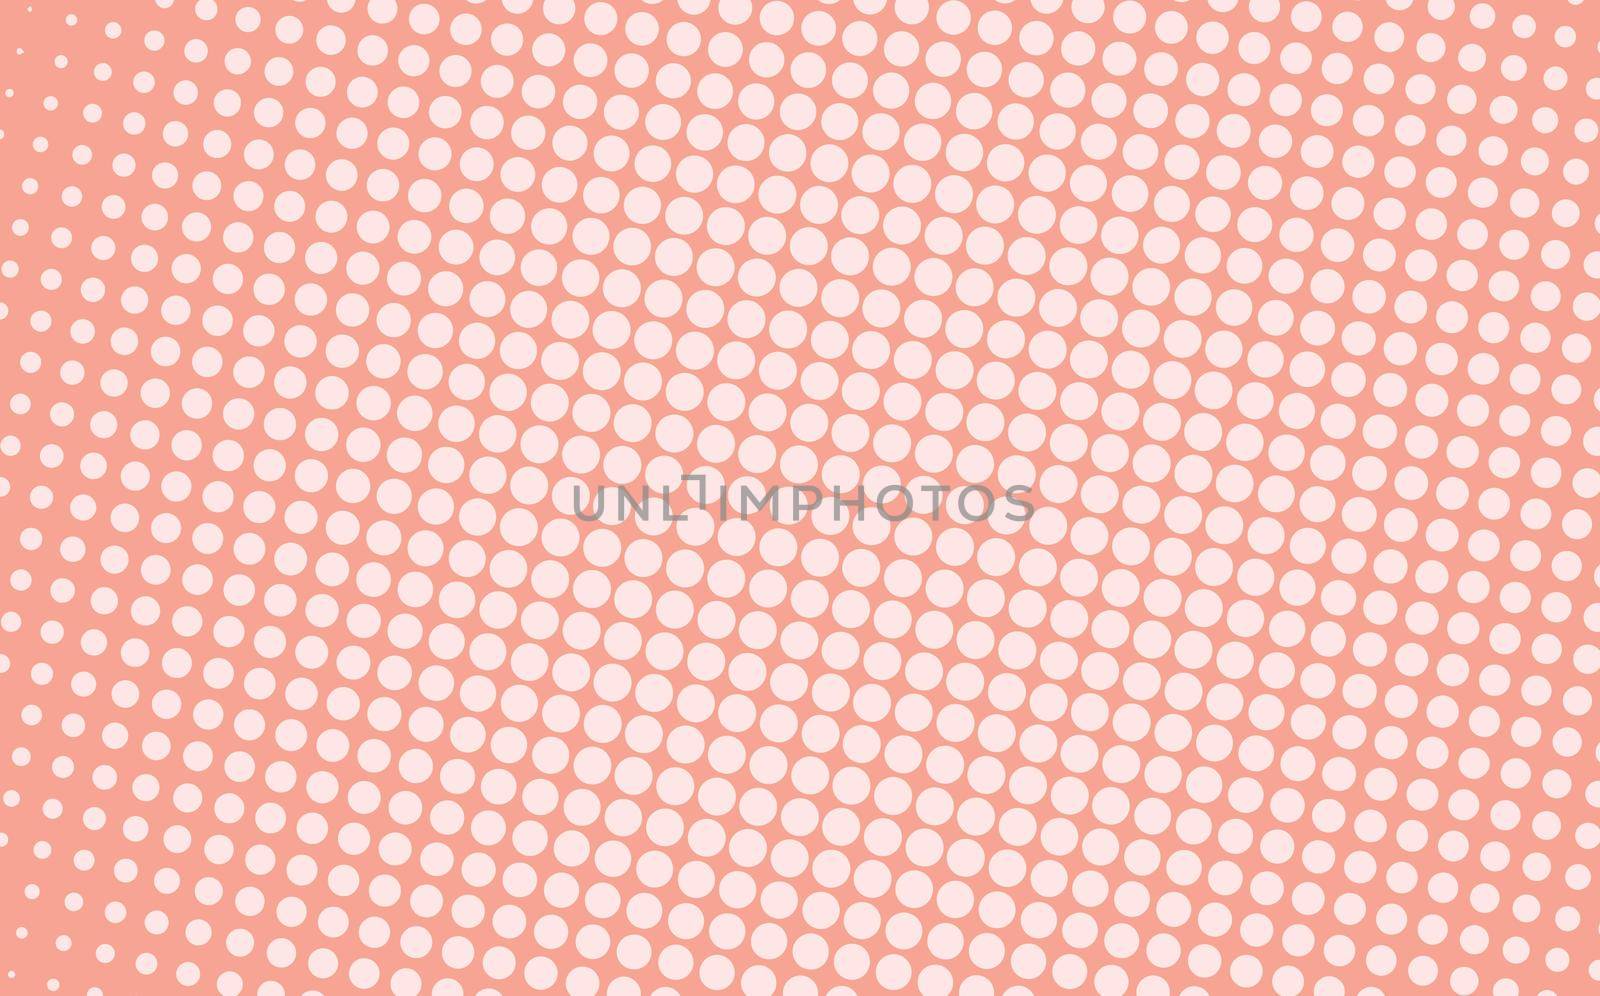 Pop art creative concept colorful comics book magazine cover. Polka dots colorful background. Cartoon halftone retro pattern. Abstract template design for poster, card, sale banner, empty bubble by allaku